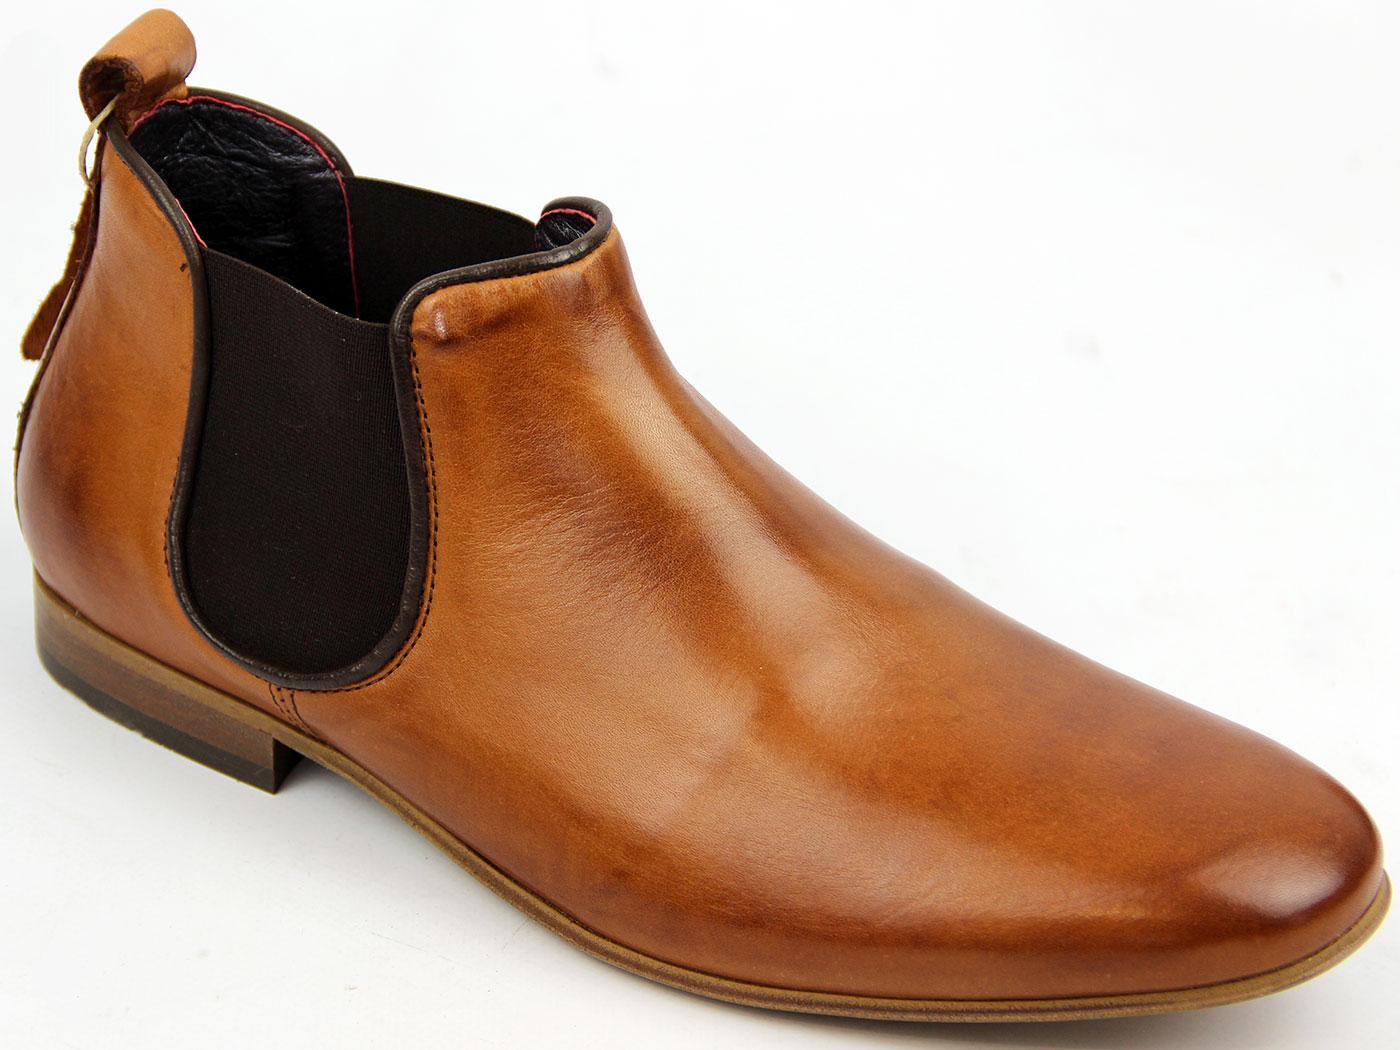 DELICIOUS JUNCTION Kings Road 60s Mod Low Chelsea Boots Tan